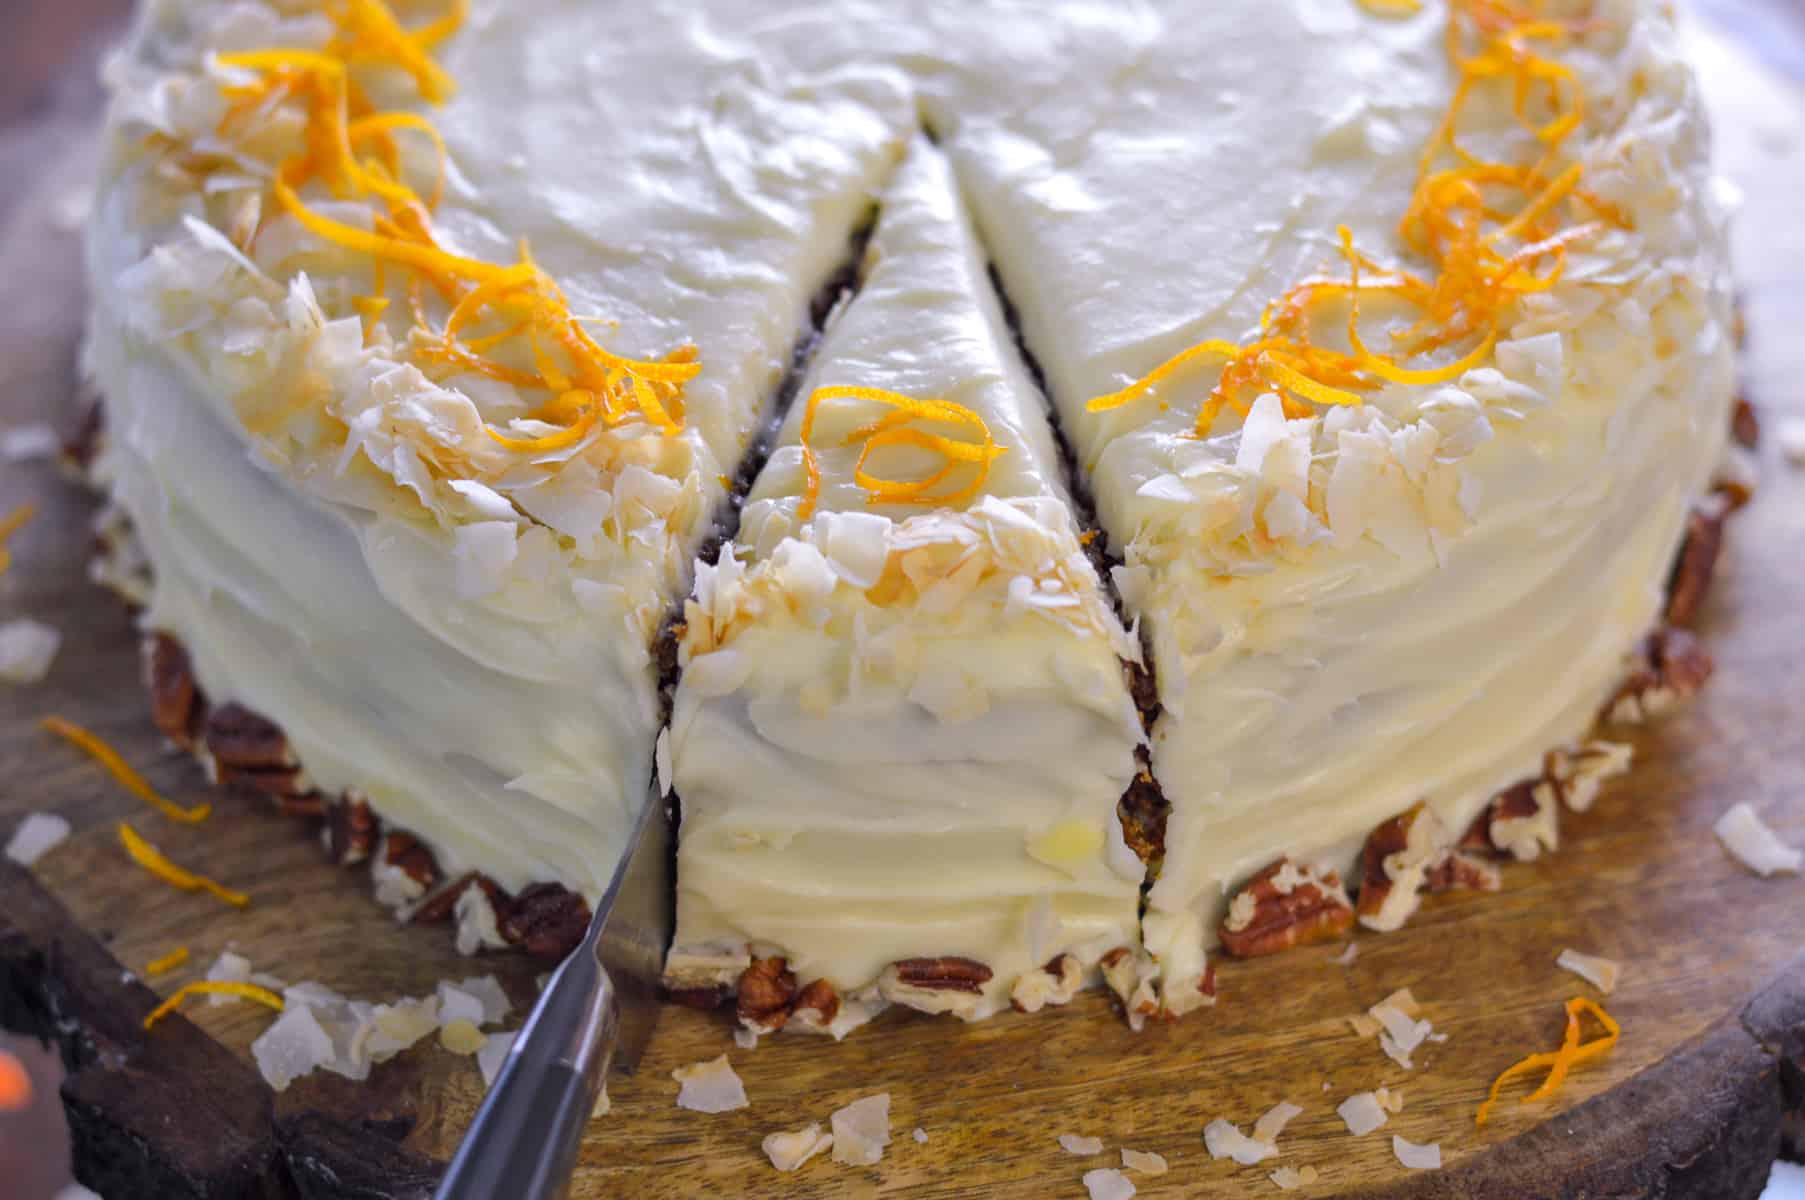 Slice being cut out of carrot cake with grey and silver knife on wooden board